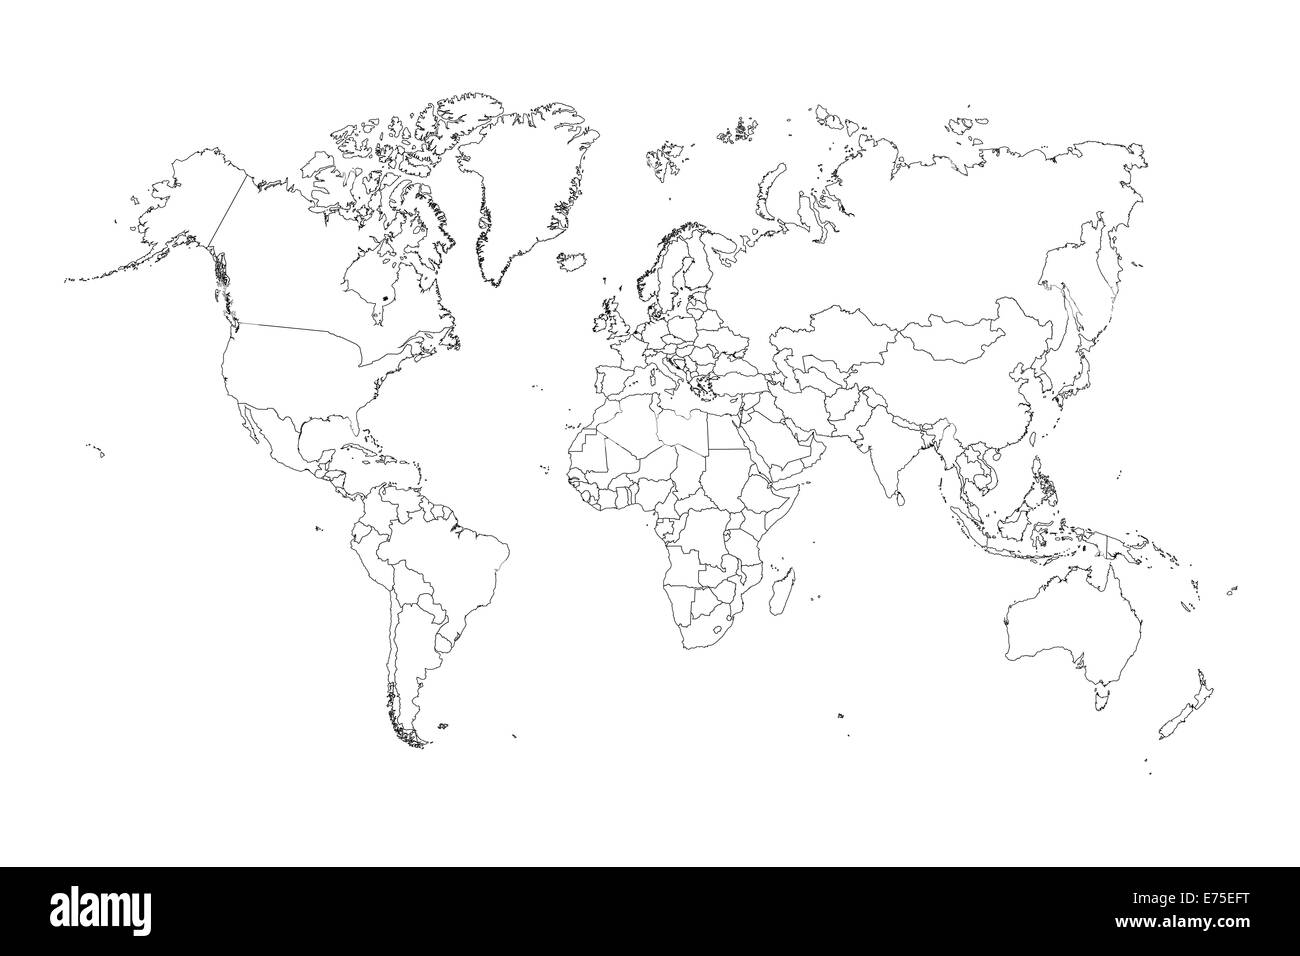 An Illustration of very fine outline of the world (with country borders) Stock Photo